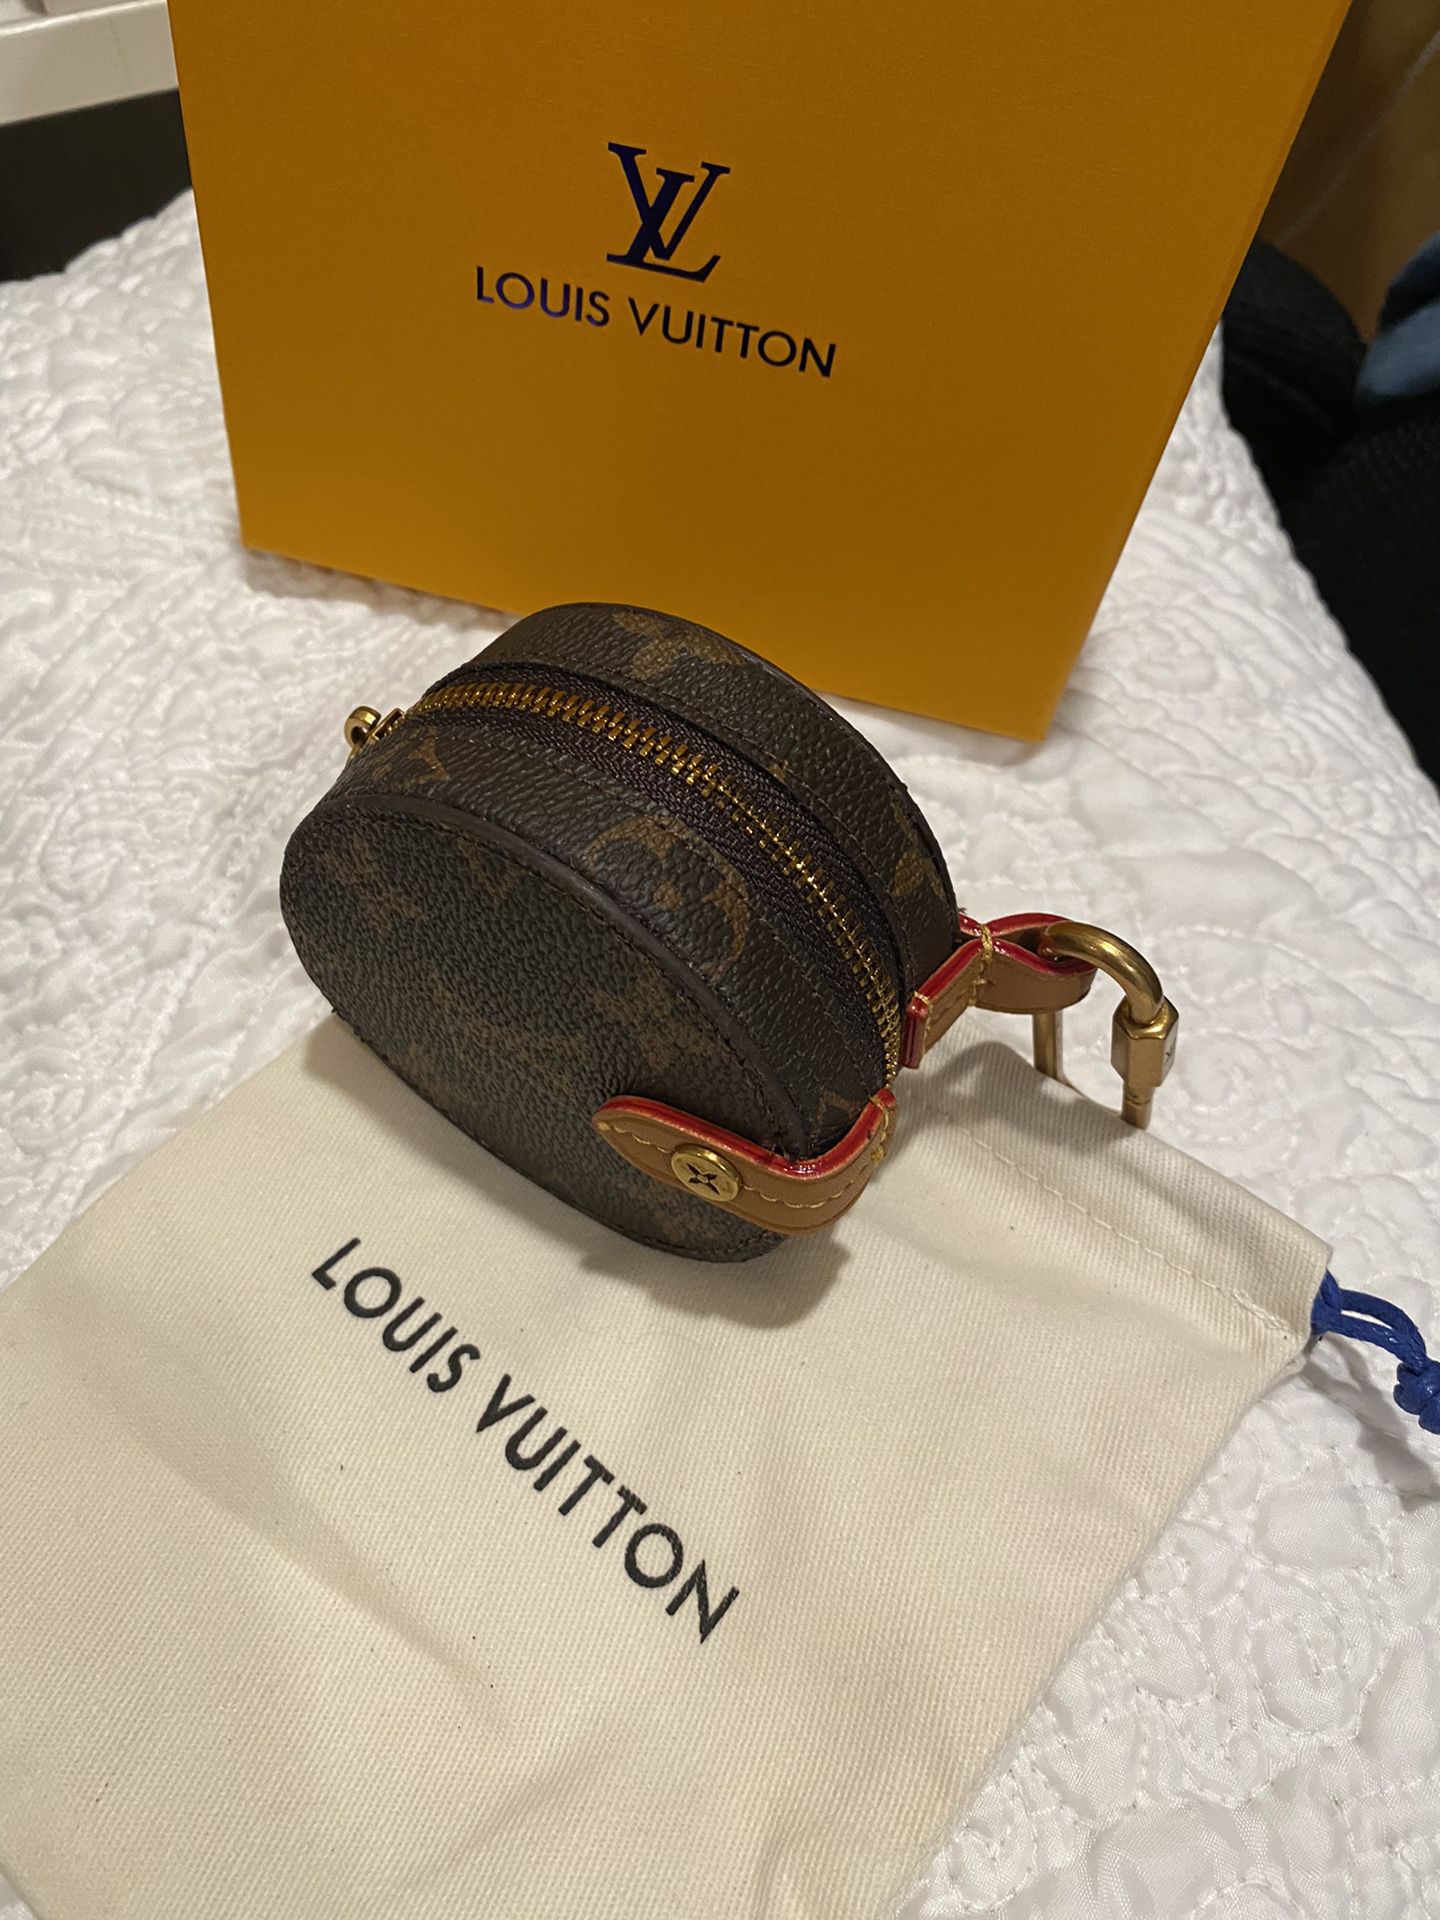 New LV Luxury Brand Old Flower Leather Wallet Keychain Brown Letter Lucky Clover Purse Bag Charm Accessories Best Gift For Friends